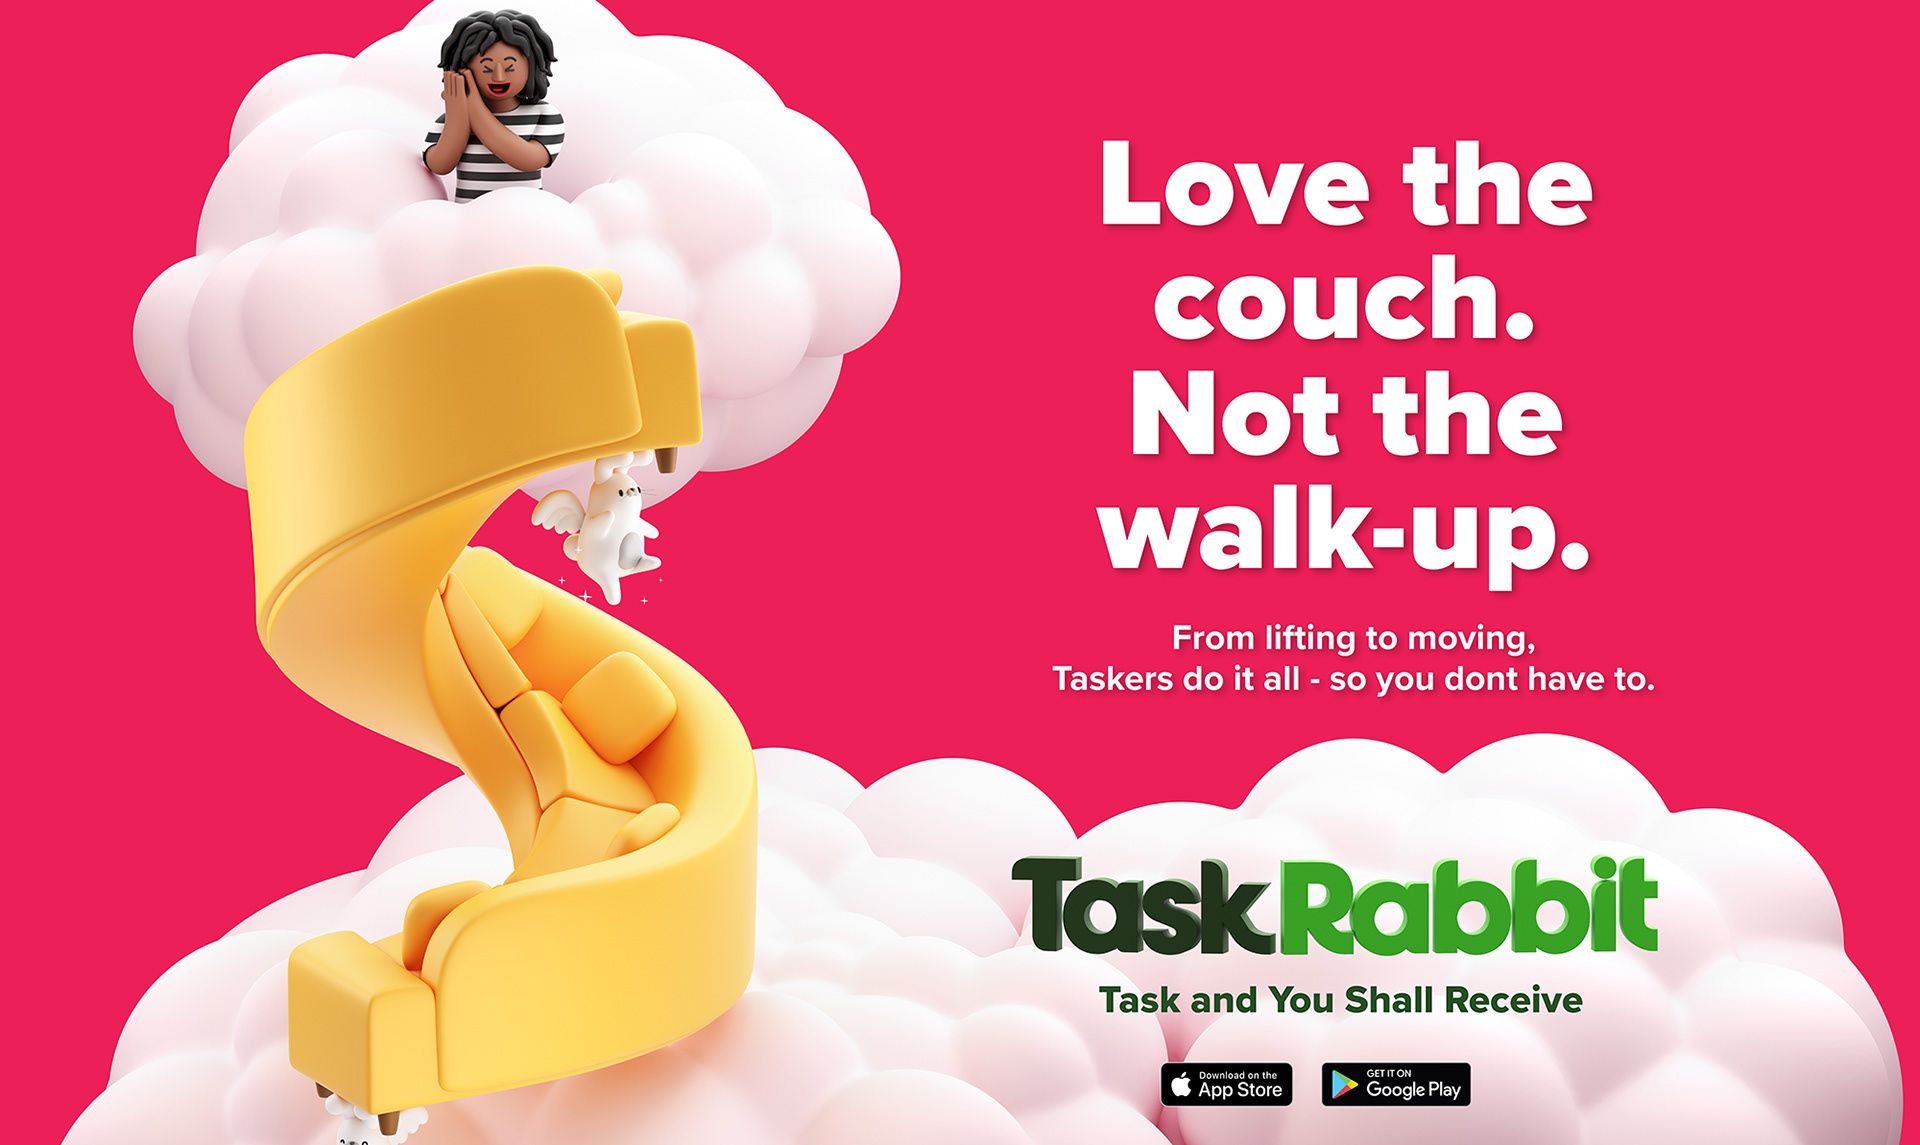 Task Rabbit - Task and you shall receive. on Behanceacd54684169265.5d53fae987570.jpg